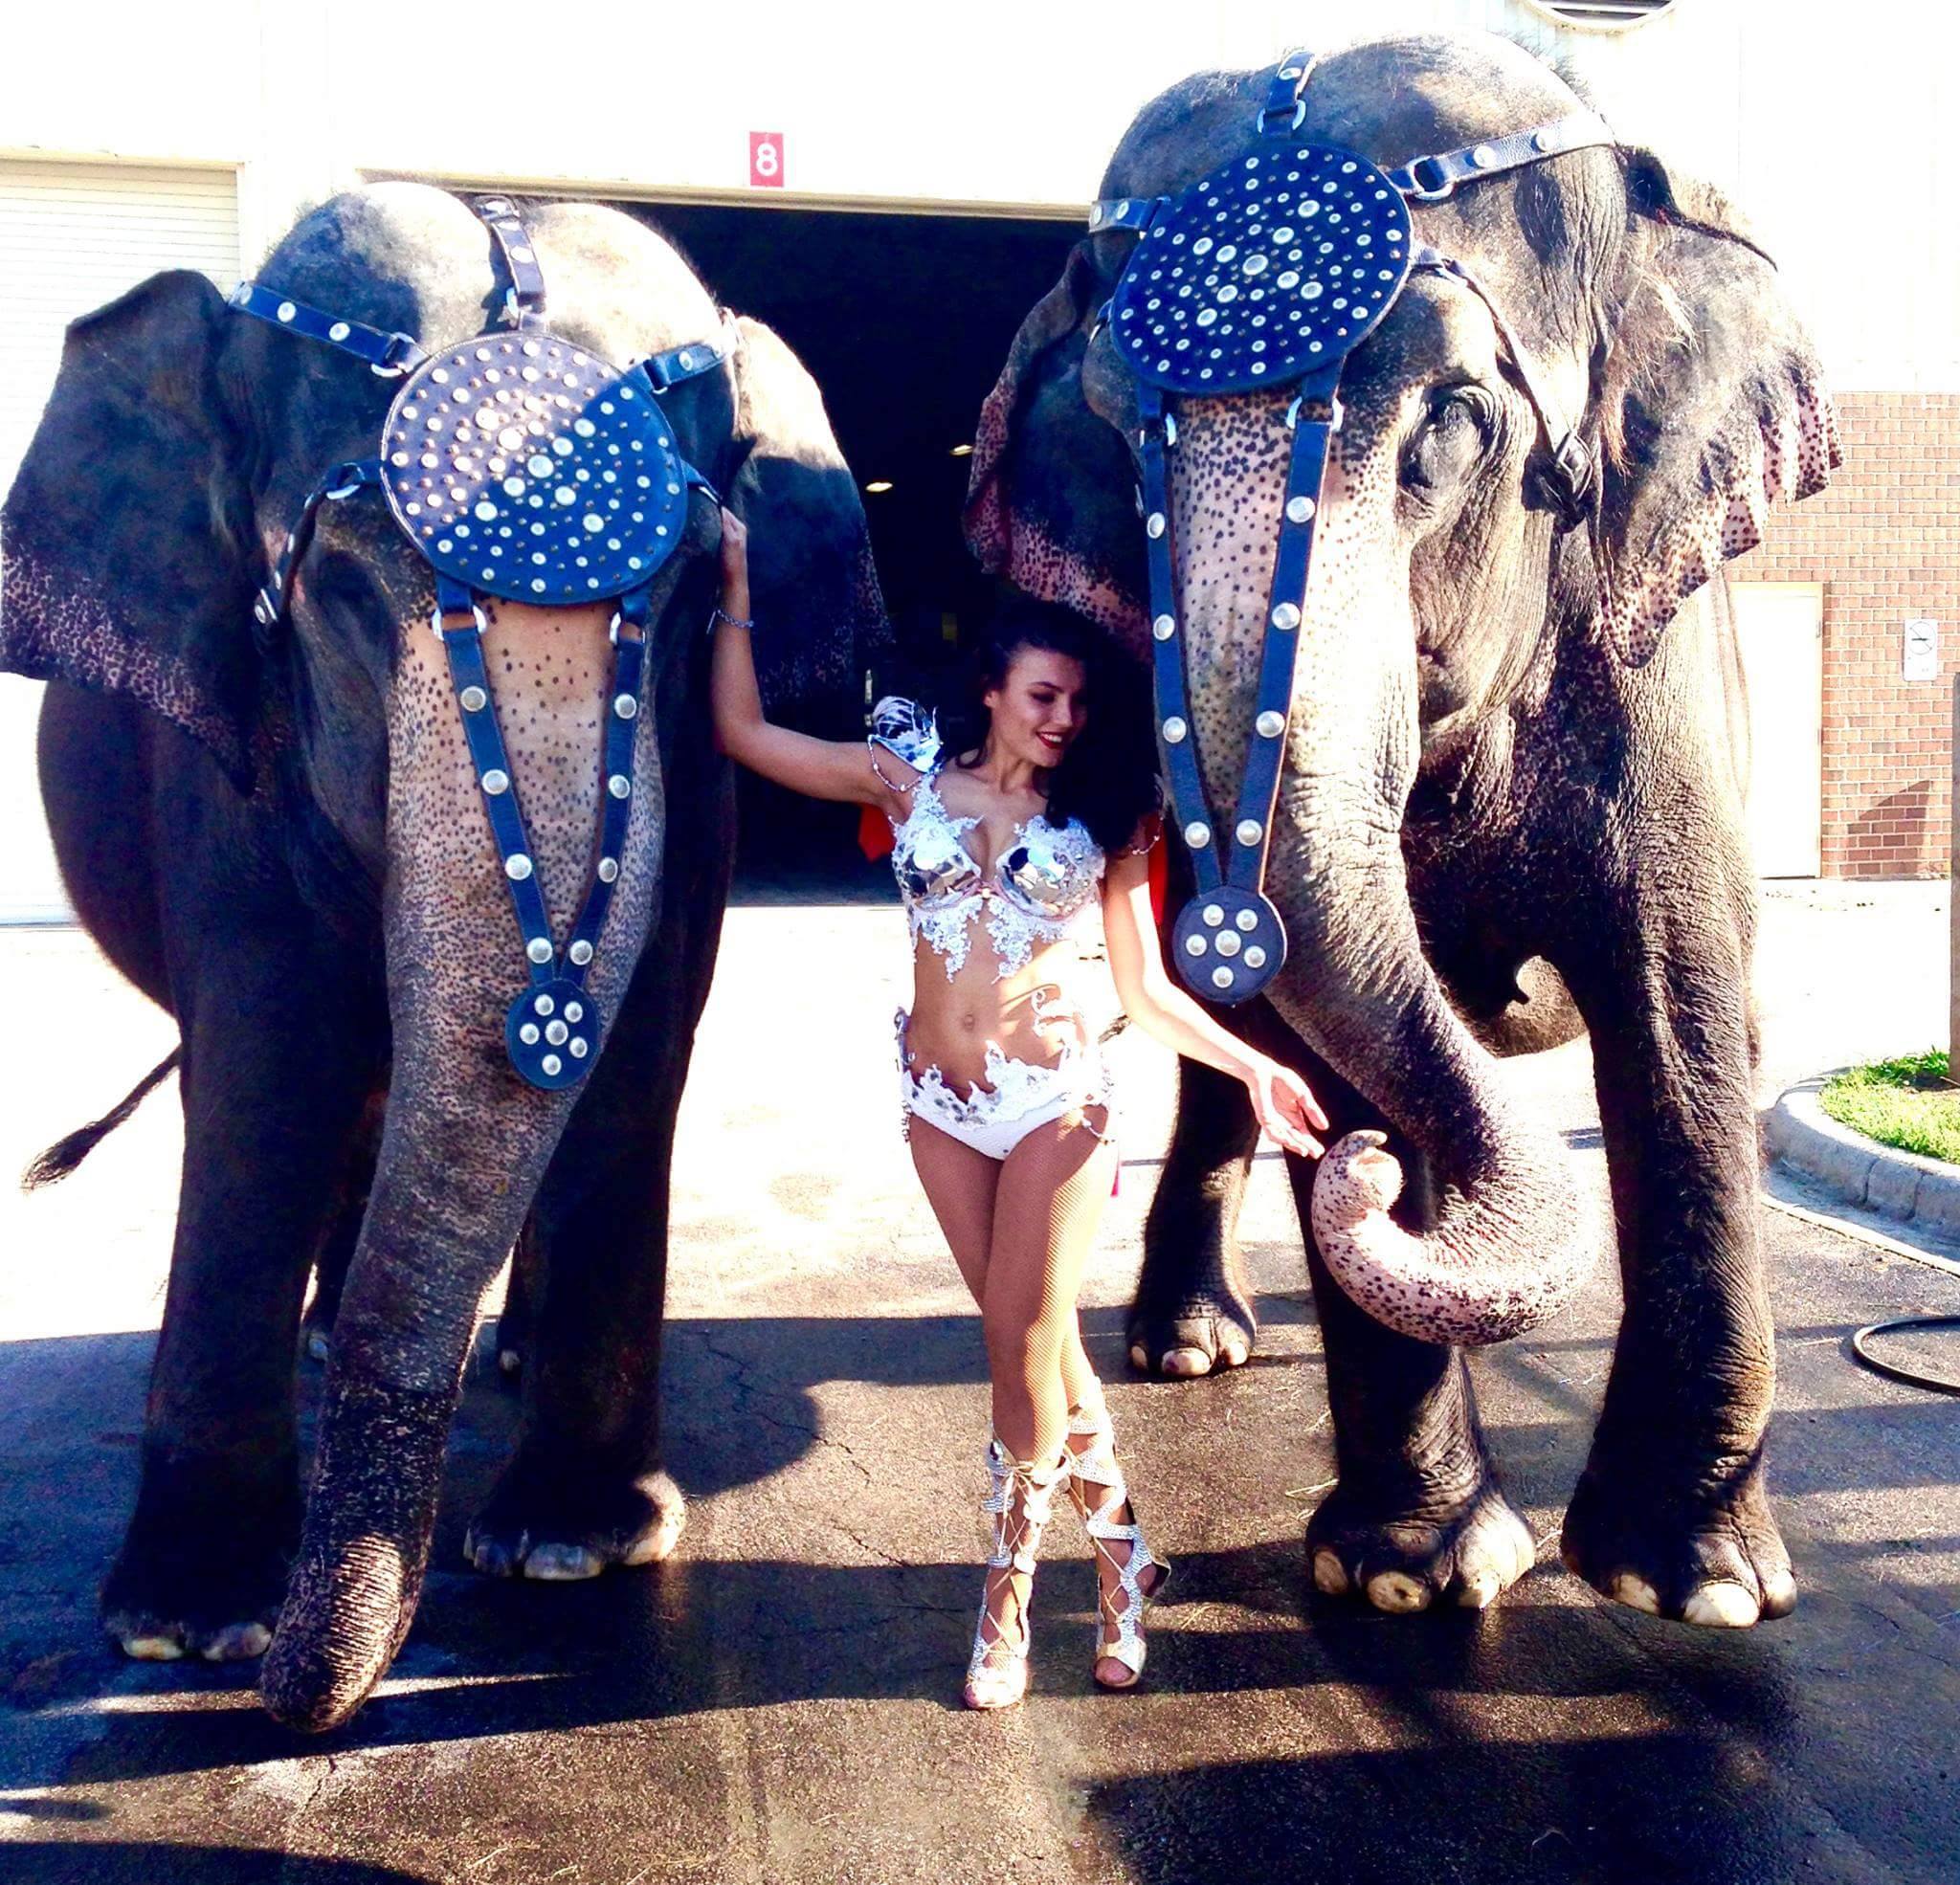 Two elephants and a show girl backstage at the circus